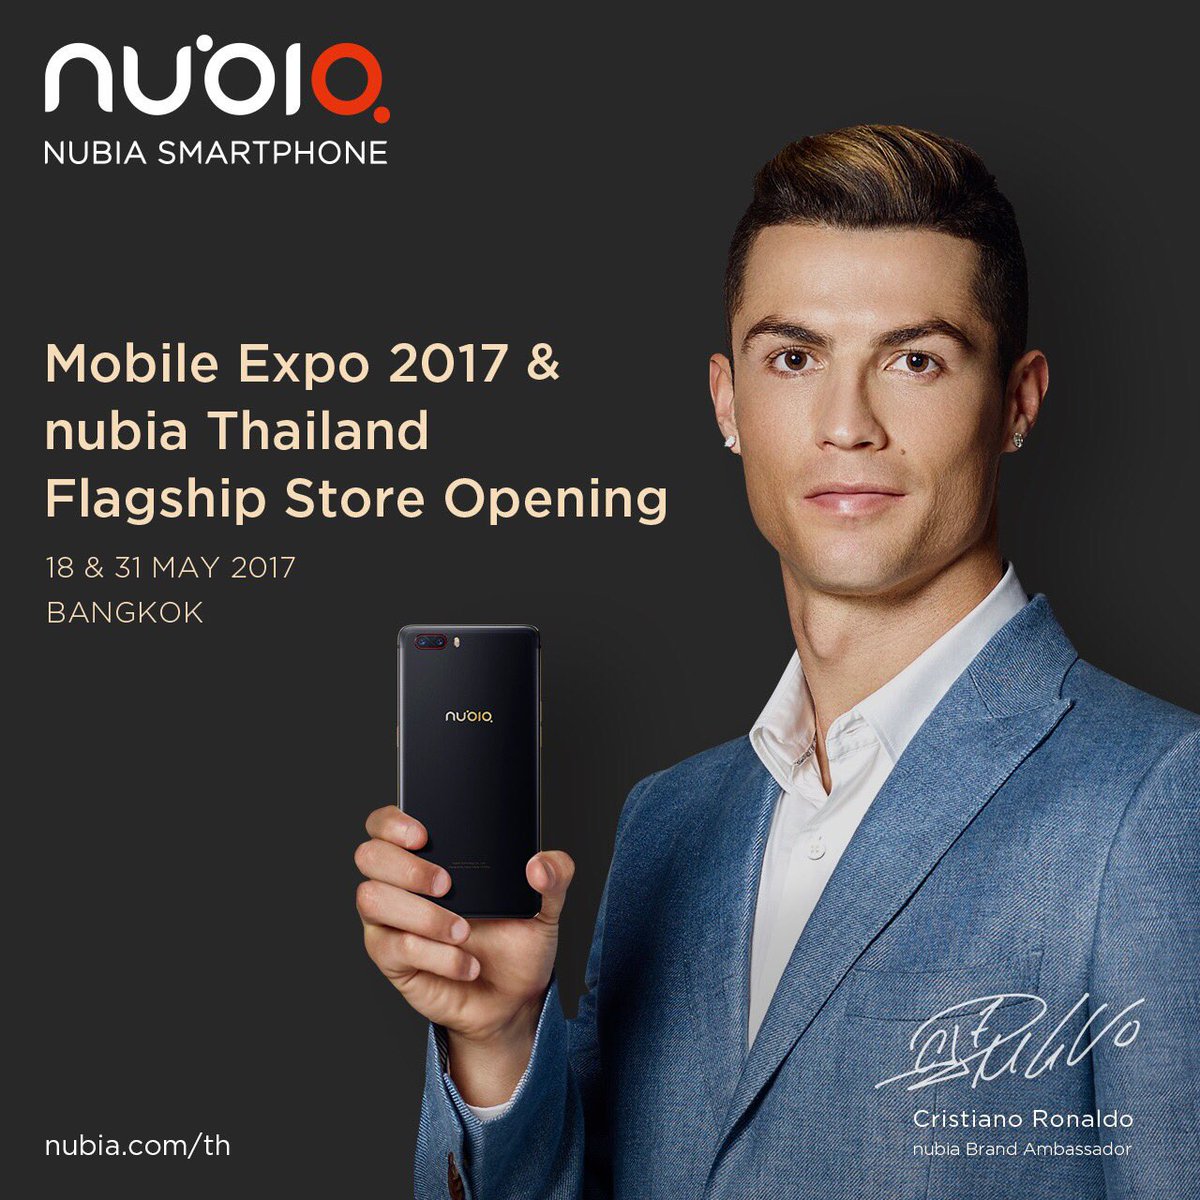 Thumbs up for nubia Thailand Flagship Store grand opening and good luck on the Mobile Expo 2017. @nubiasmartphone https://t.co/pJgpqxkK4C